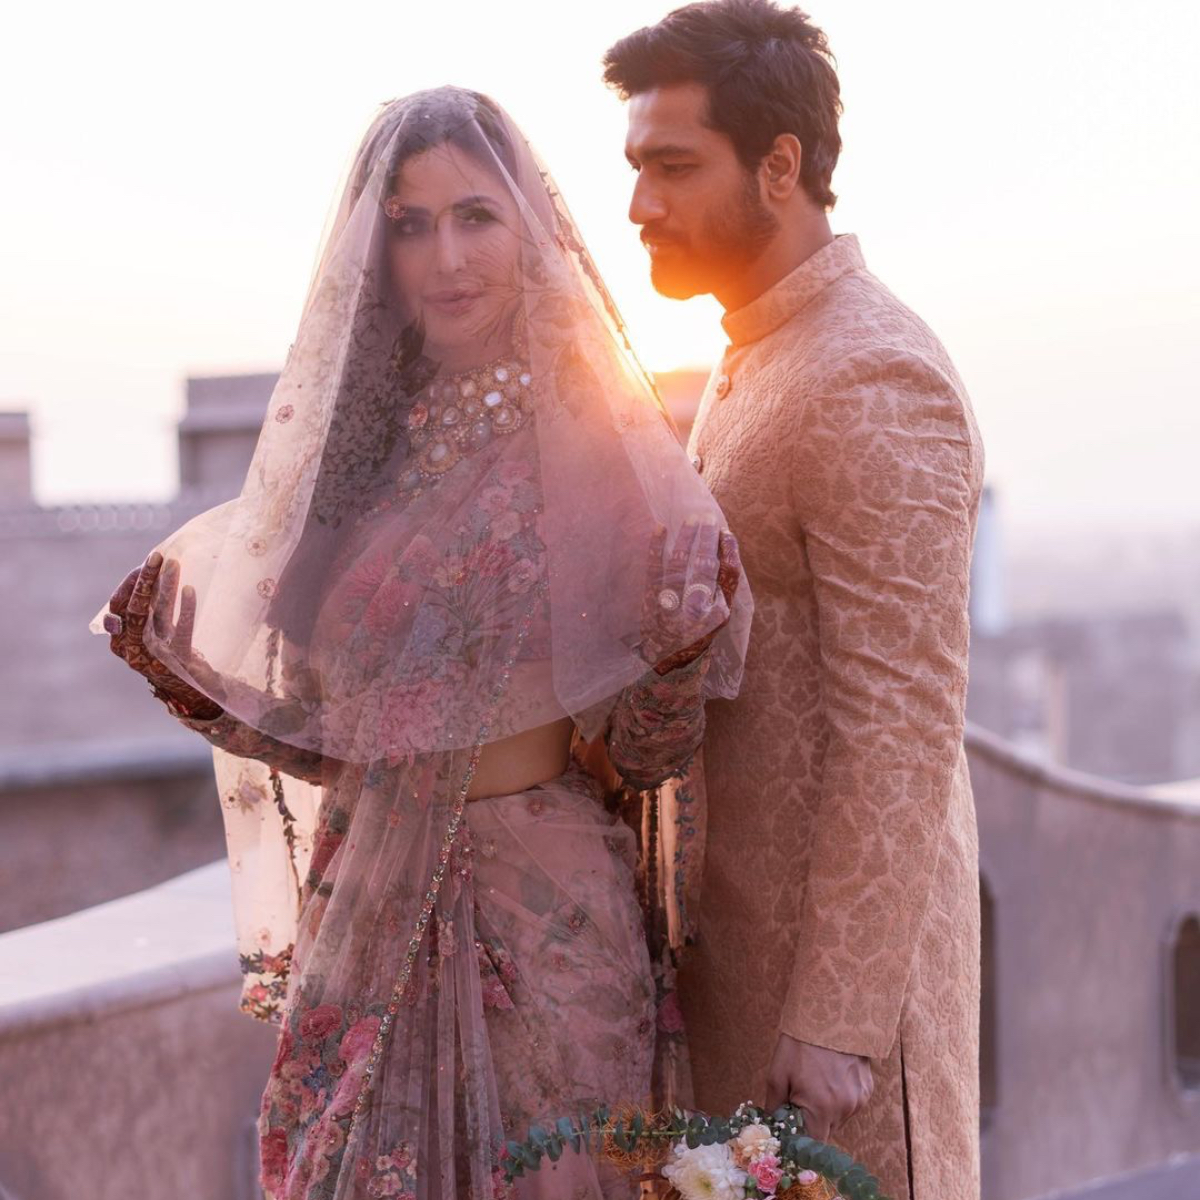 Katrina Kaif looks DREAMY in a floral Sabyasachi saree and sheer veil with Vicky Kaushal in a sherwani 